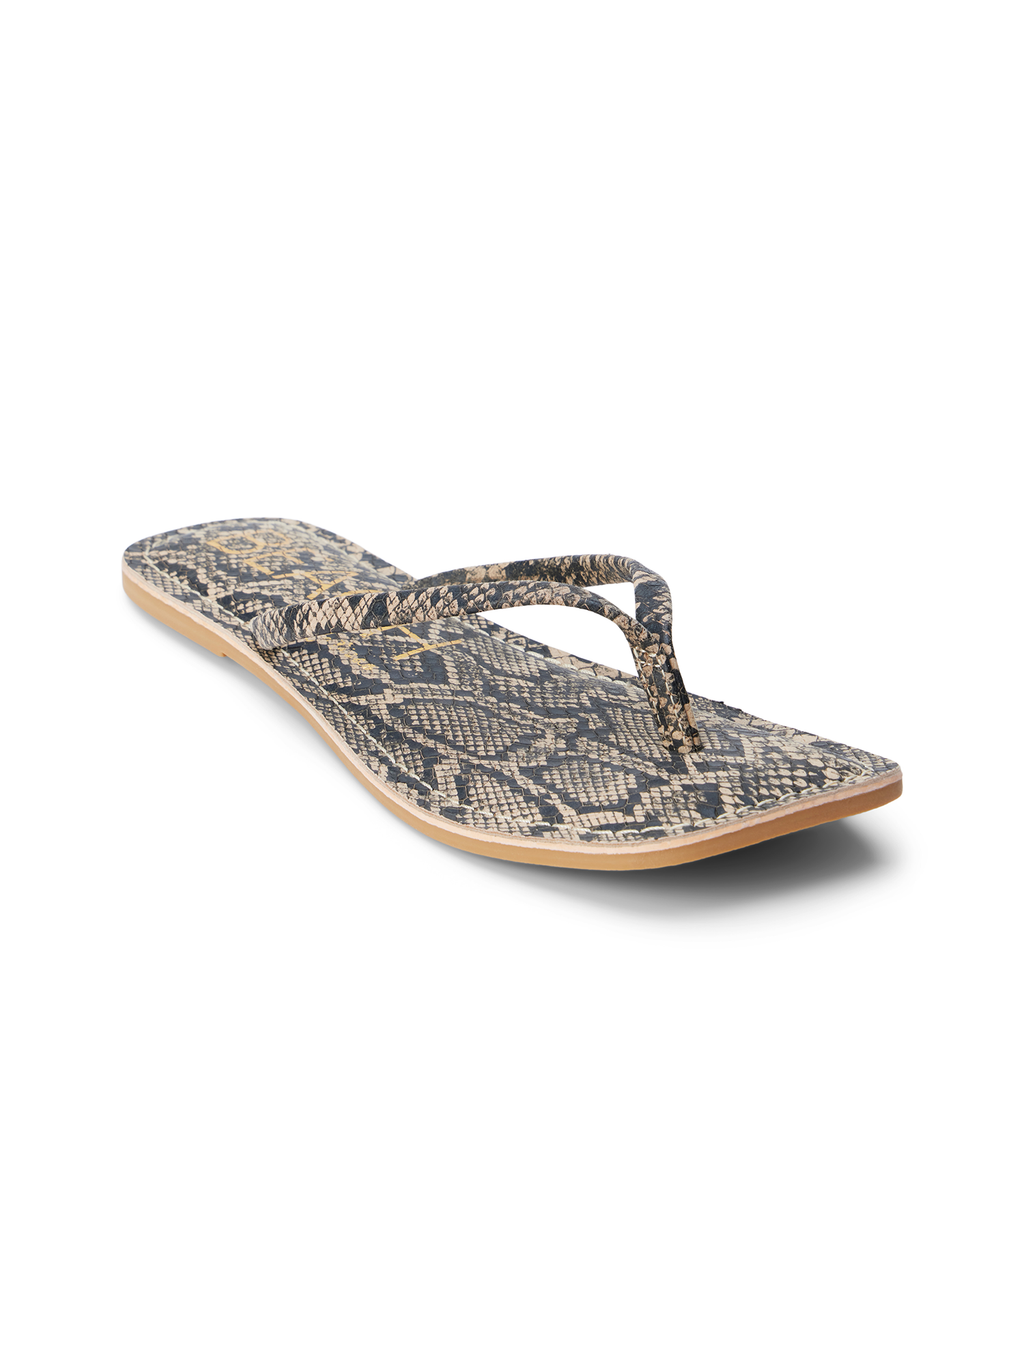 Bungalow Sandal in Brown Snake - Stitch And Feather